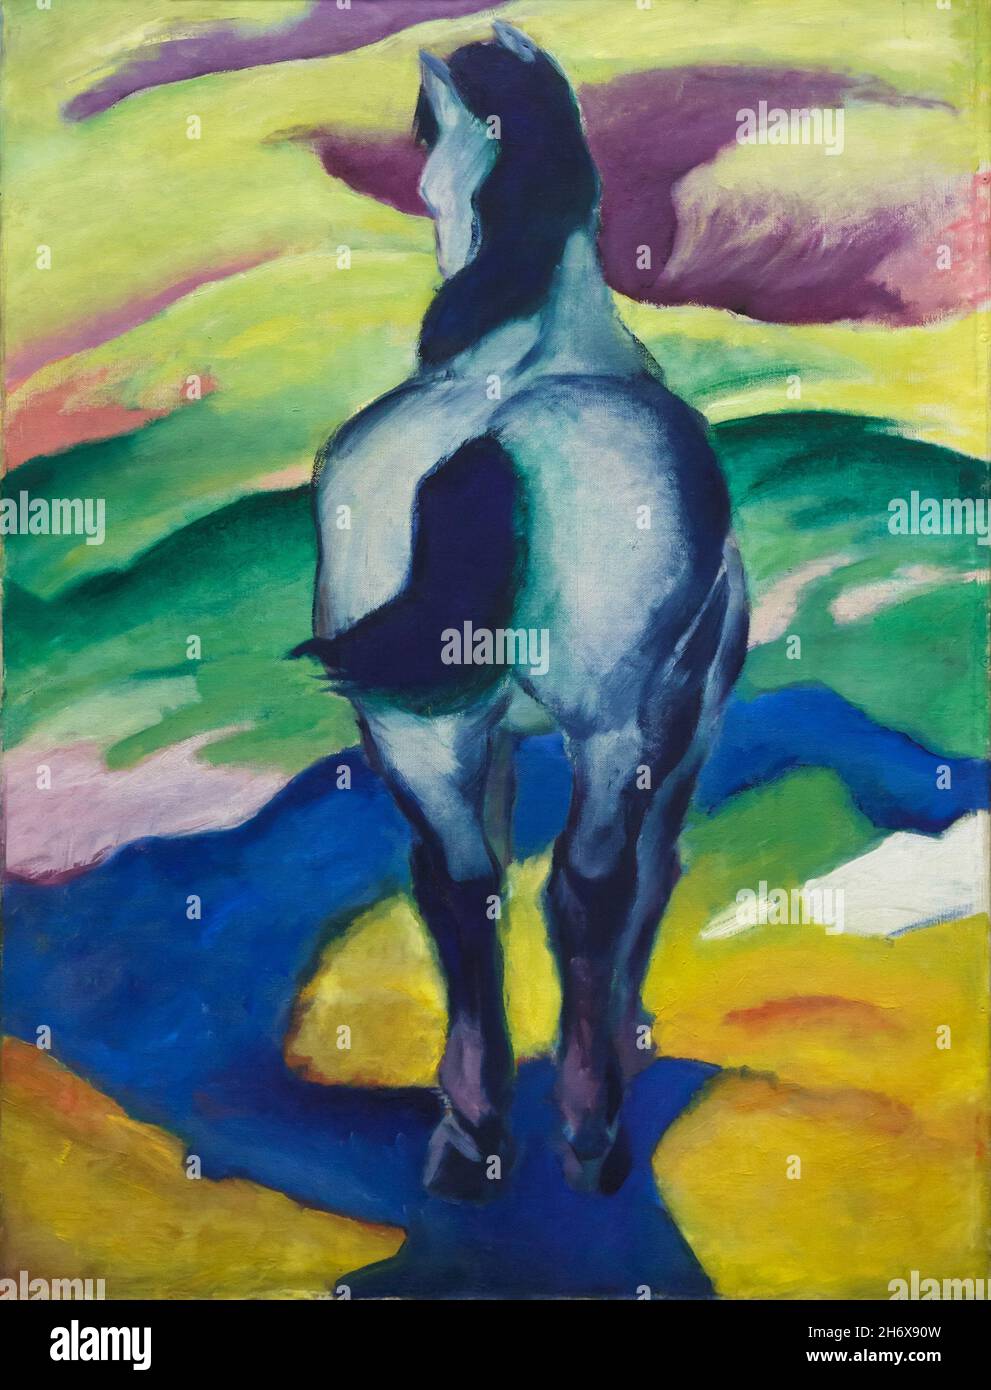 Painting 'Blue Horse II' by German expressionist painter Franz Marc (1911) on display in the Albertina Museum in Vienna, Austria. Stock Photo